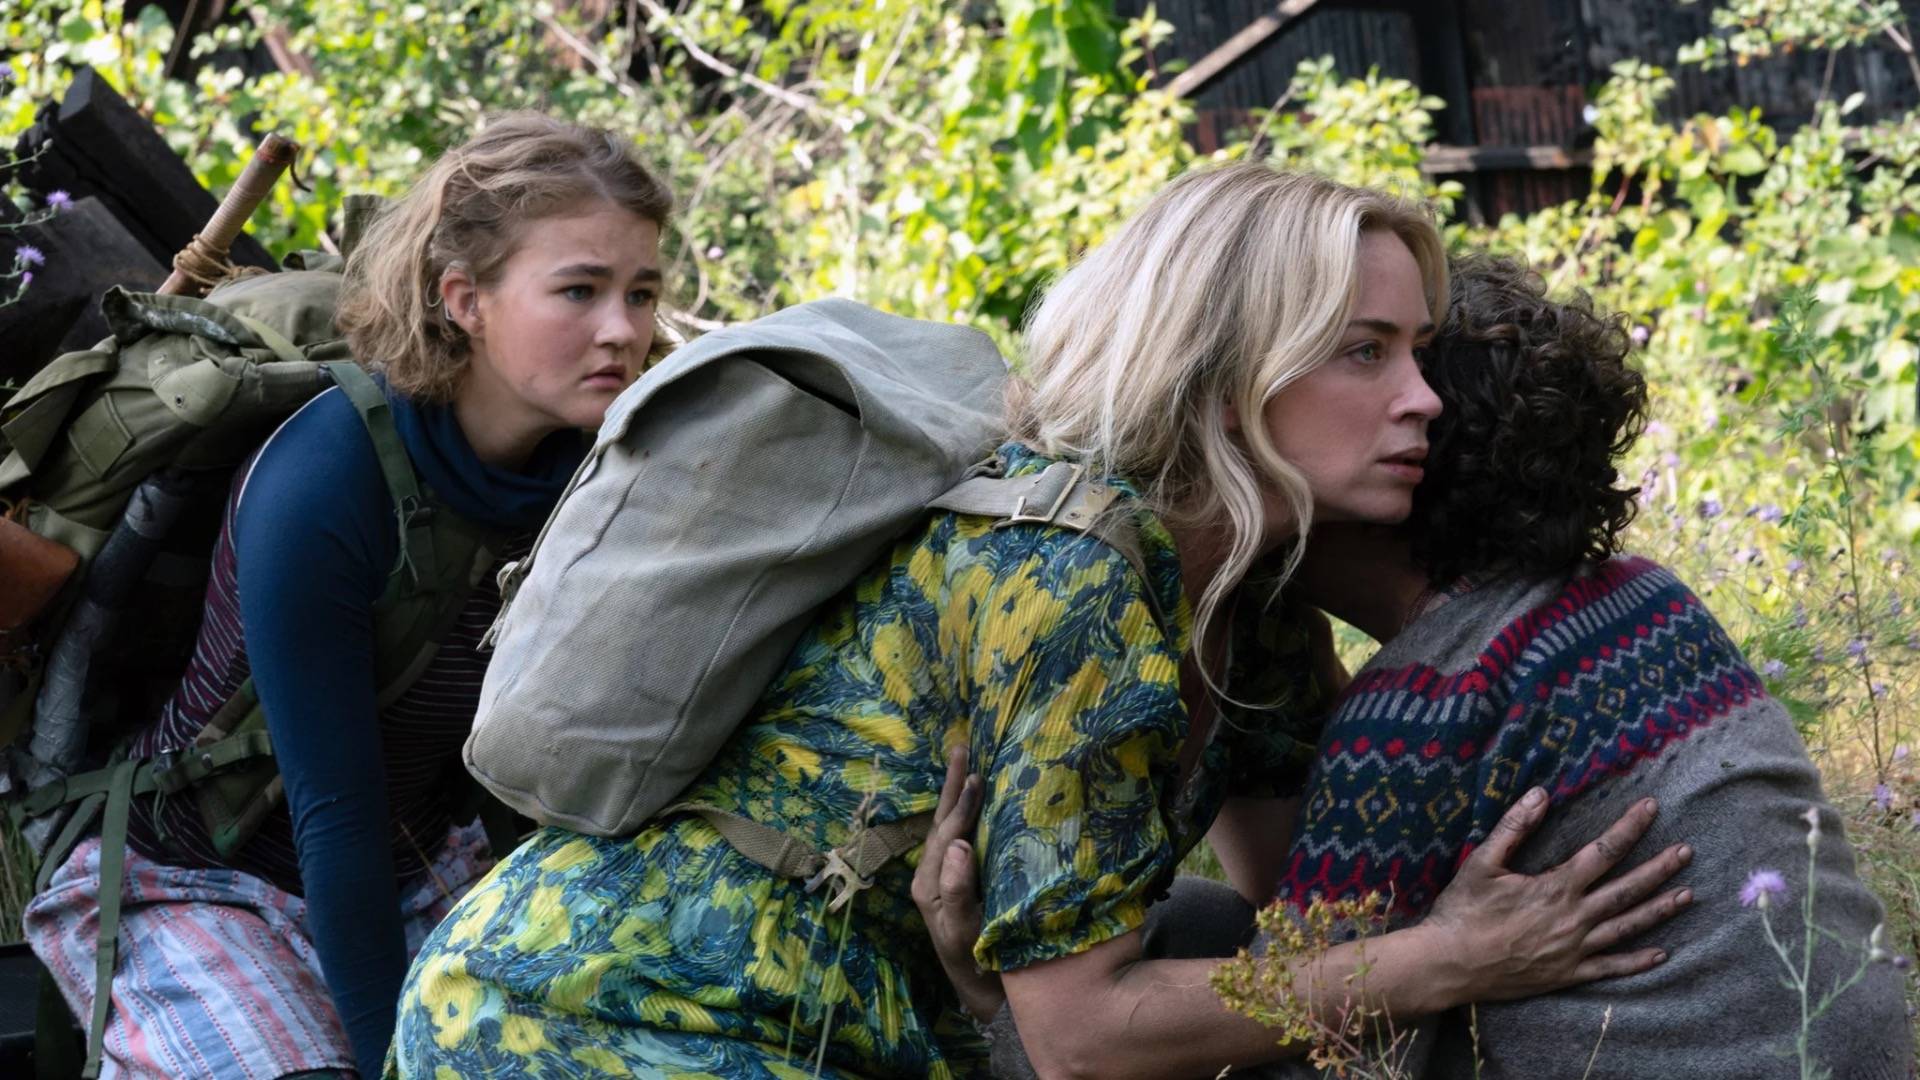 Emily Blunt crouching in fear in floral address and backpack holding a small boy in a grey jumper. A young girl wearing a backpack and navy top is crouching behind her 